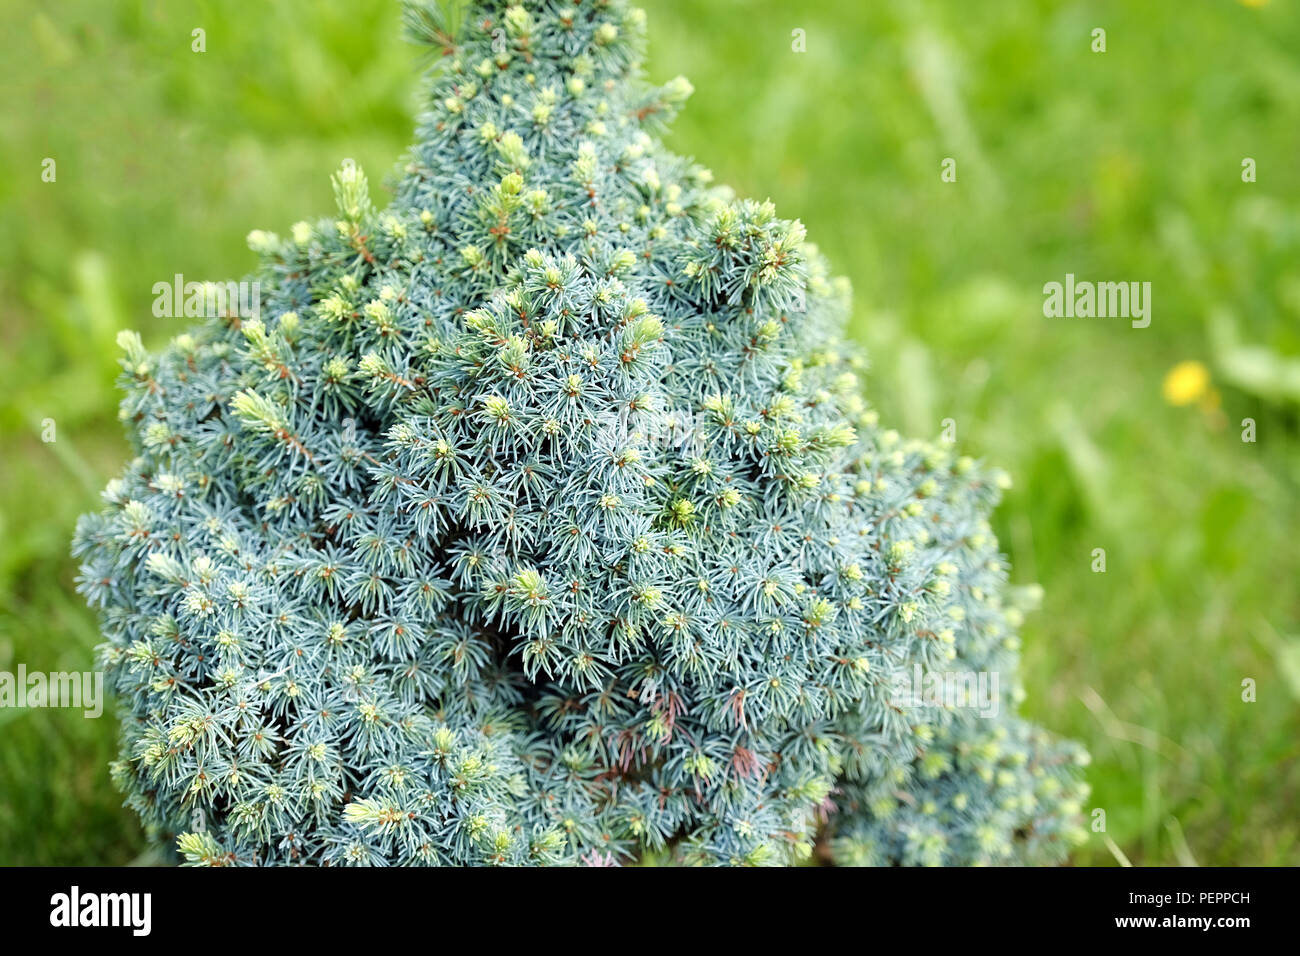 Juniper Bush close-up. Background with branches of juniper trees growing in the Park. On a grass background Stock Photo